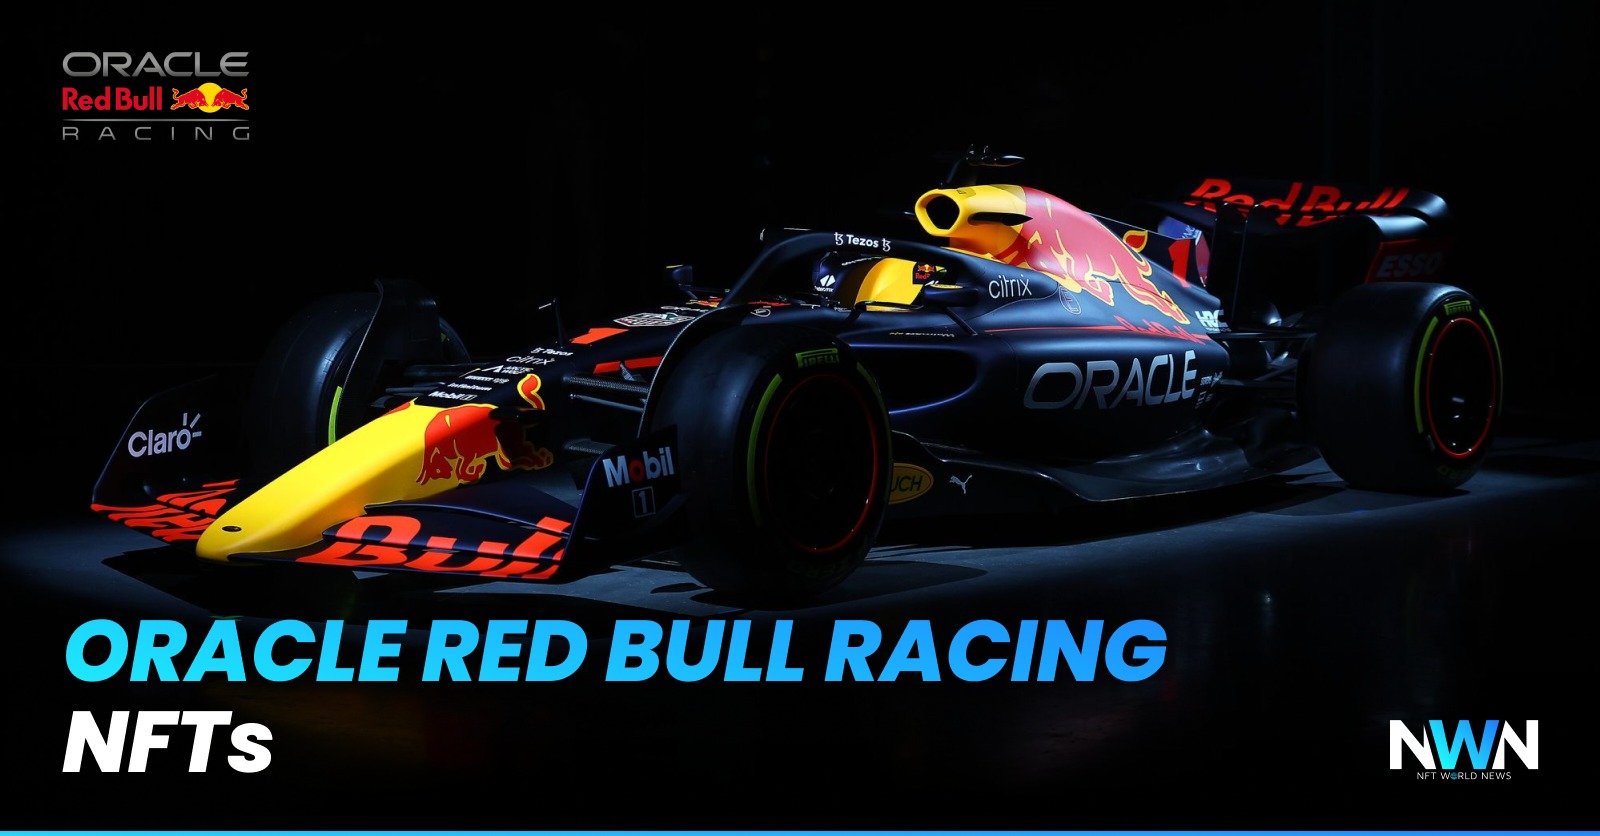 Oracle Red Bull Racing NFTs